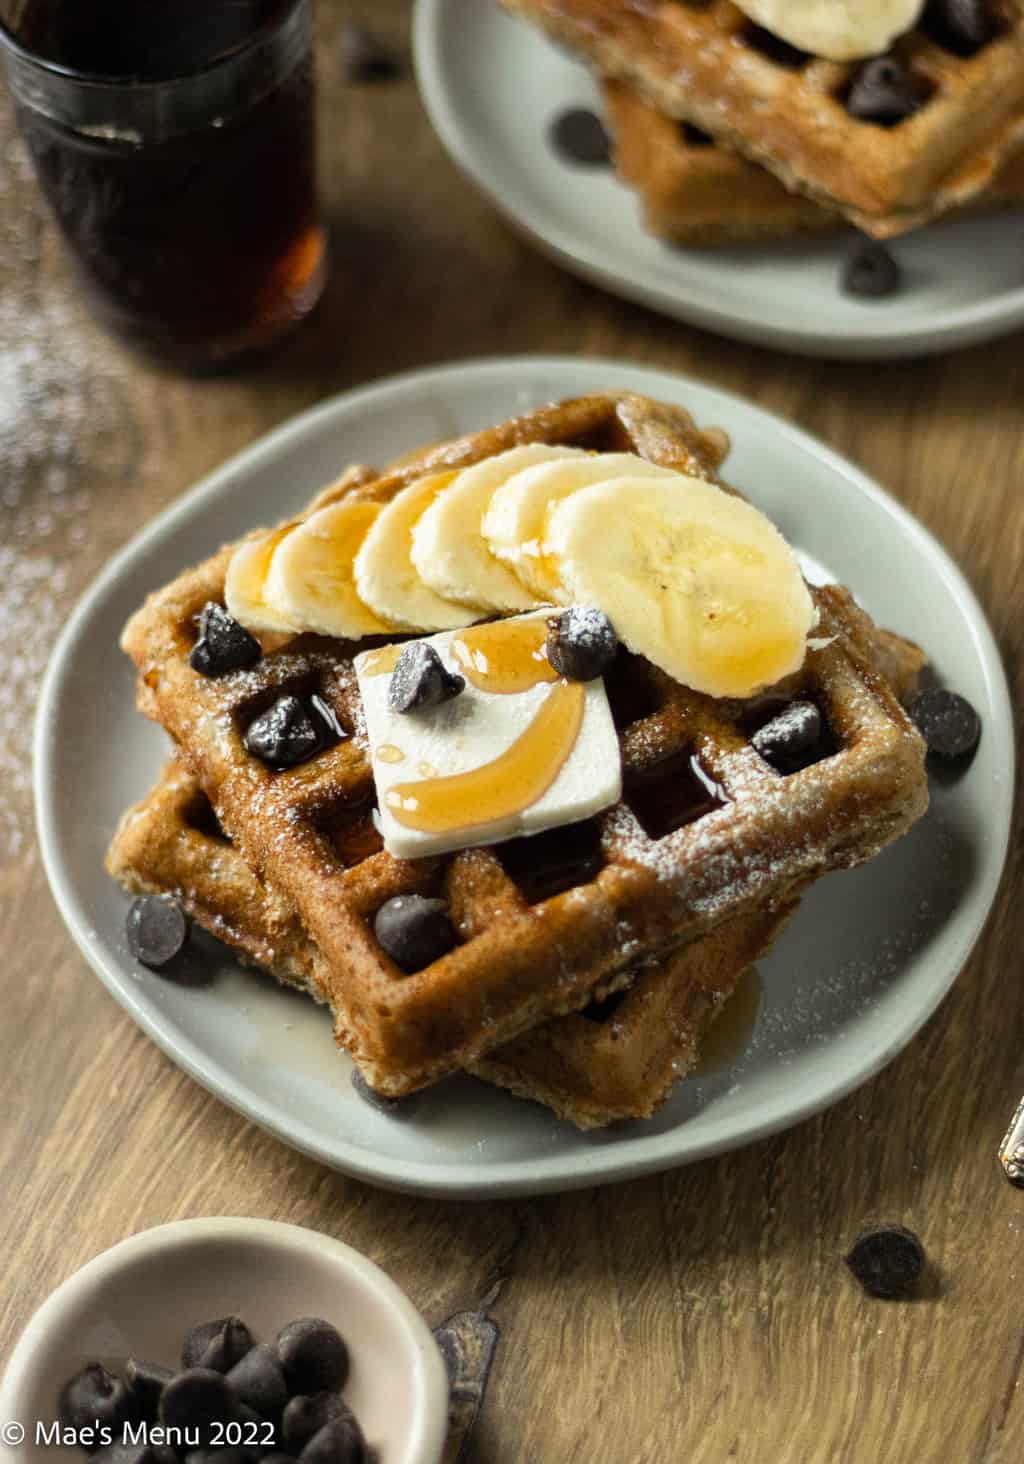 An up-close side shot of a white plate with banana waffles, bananas, syrup, and chocolate chips.